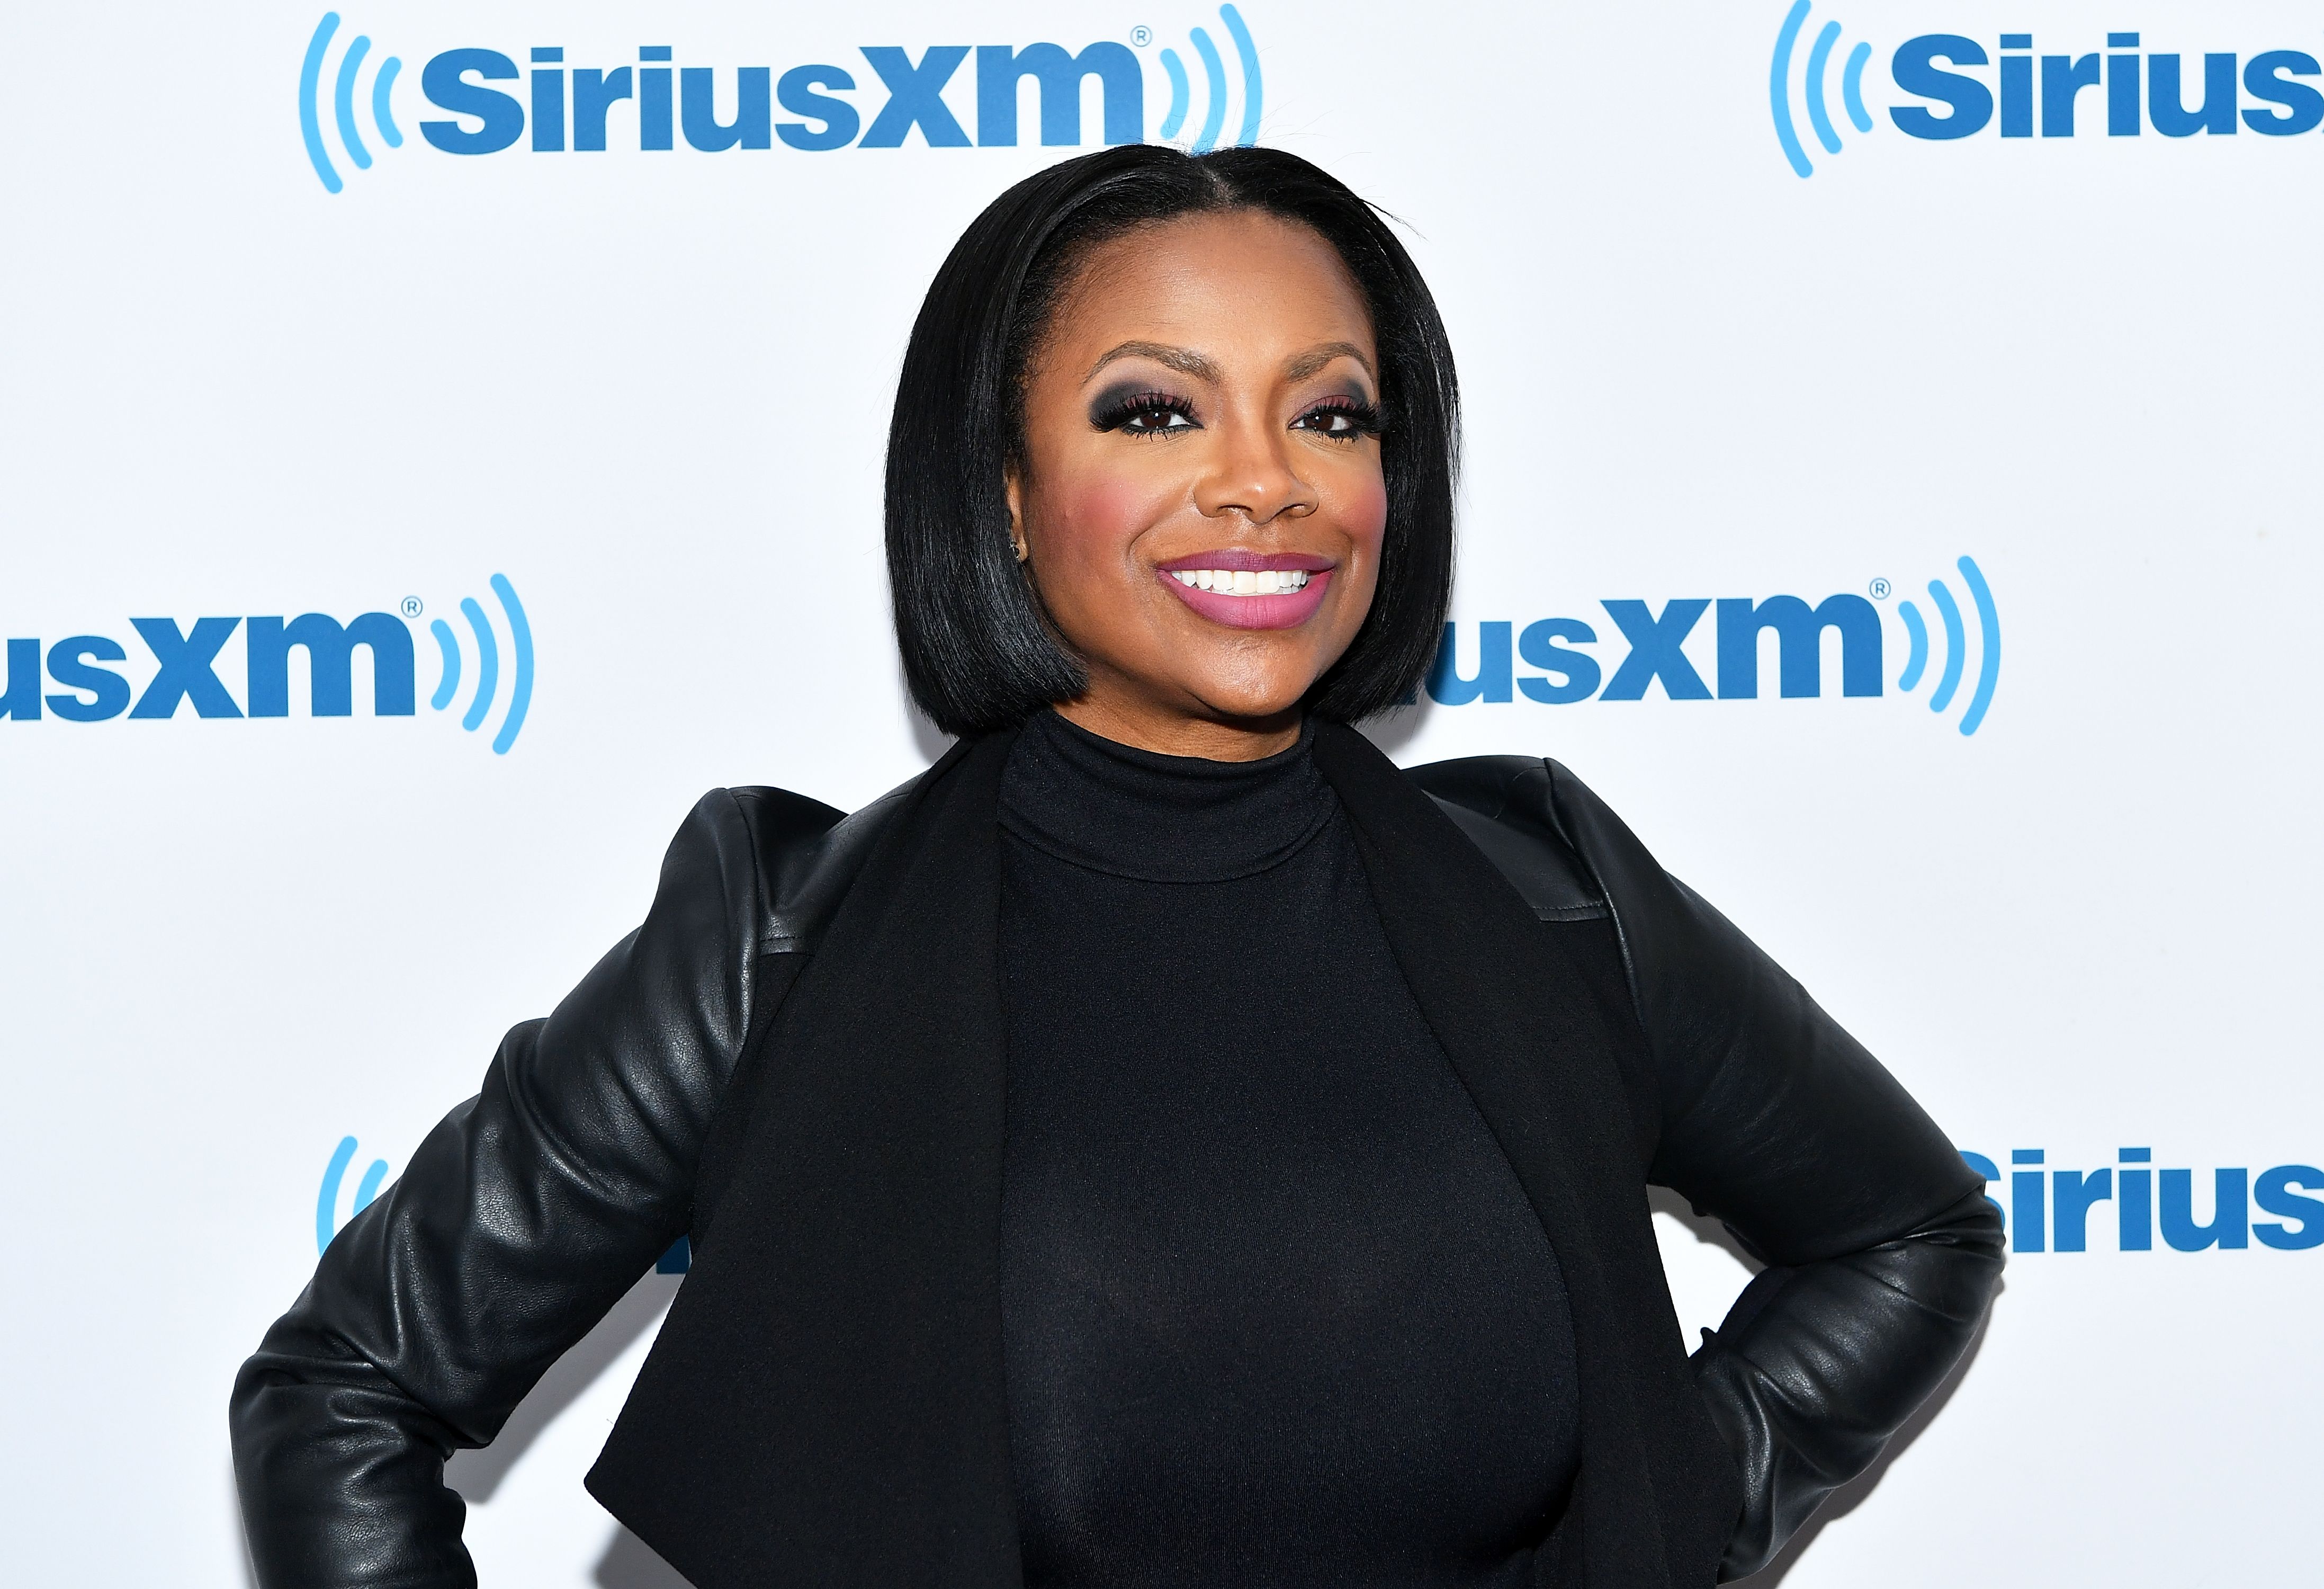 Kandi Burruss visits SiriusXM Studios on March 5, 2018 in New York City | Photo: Getty Images